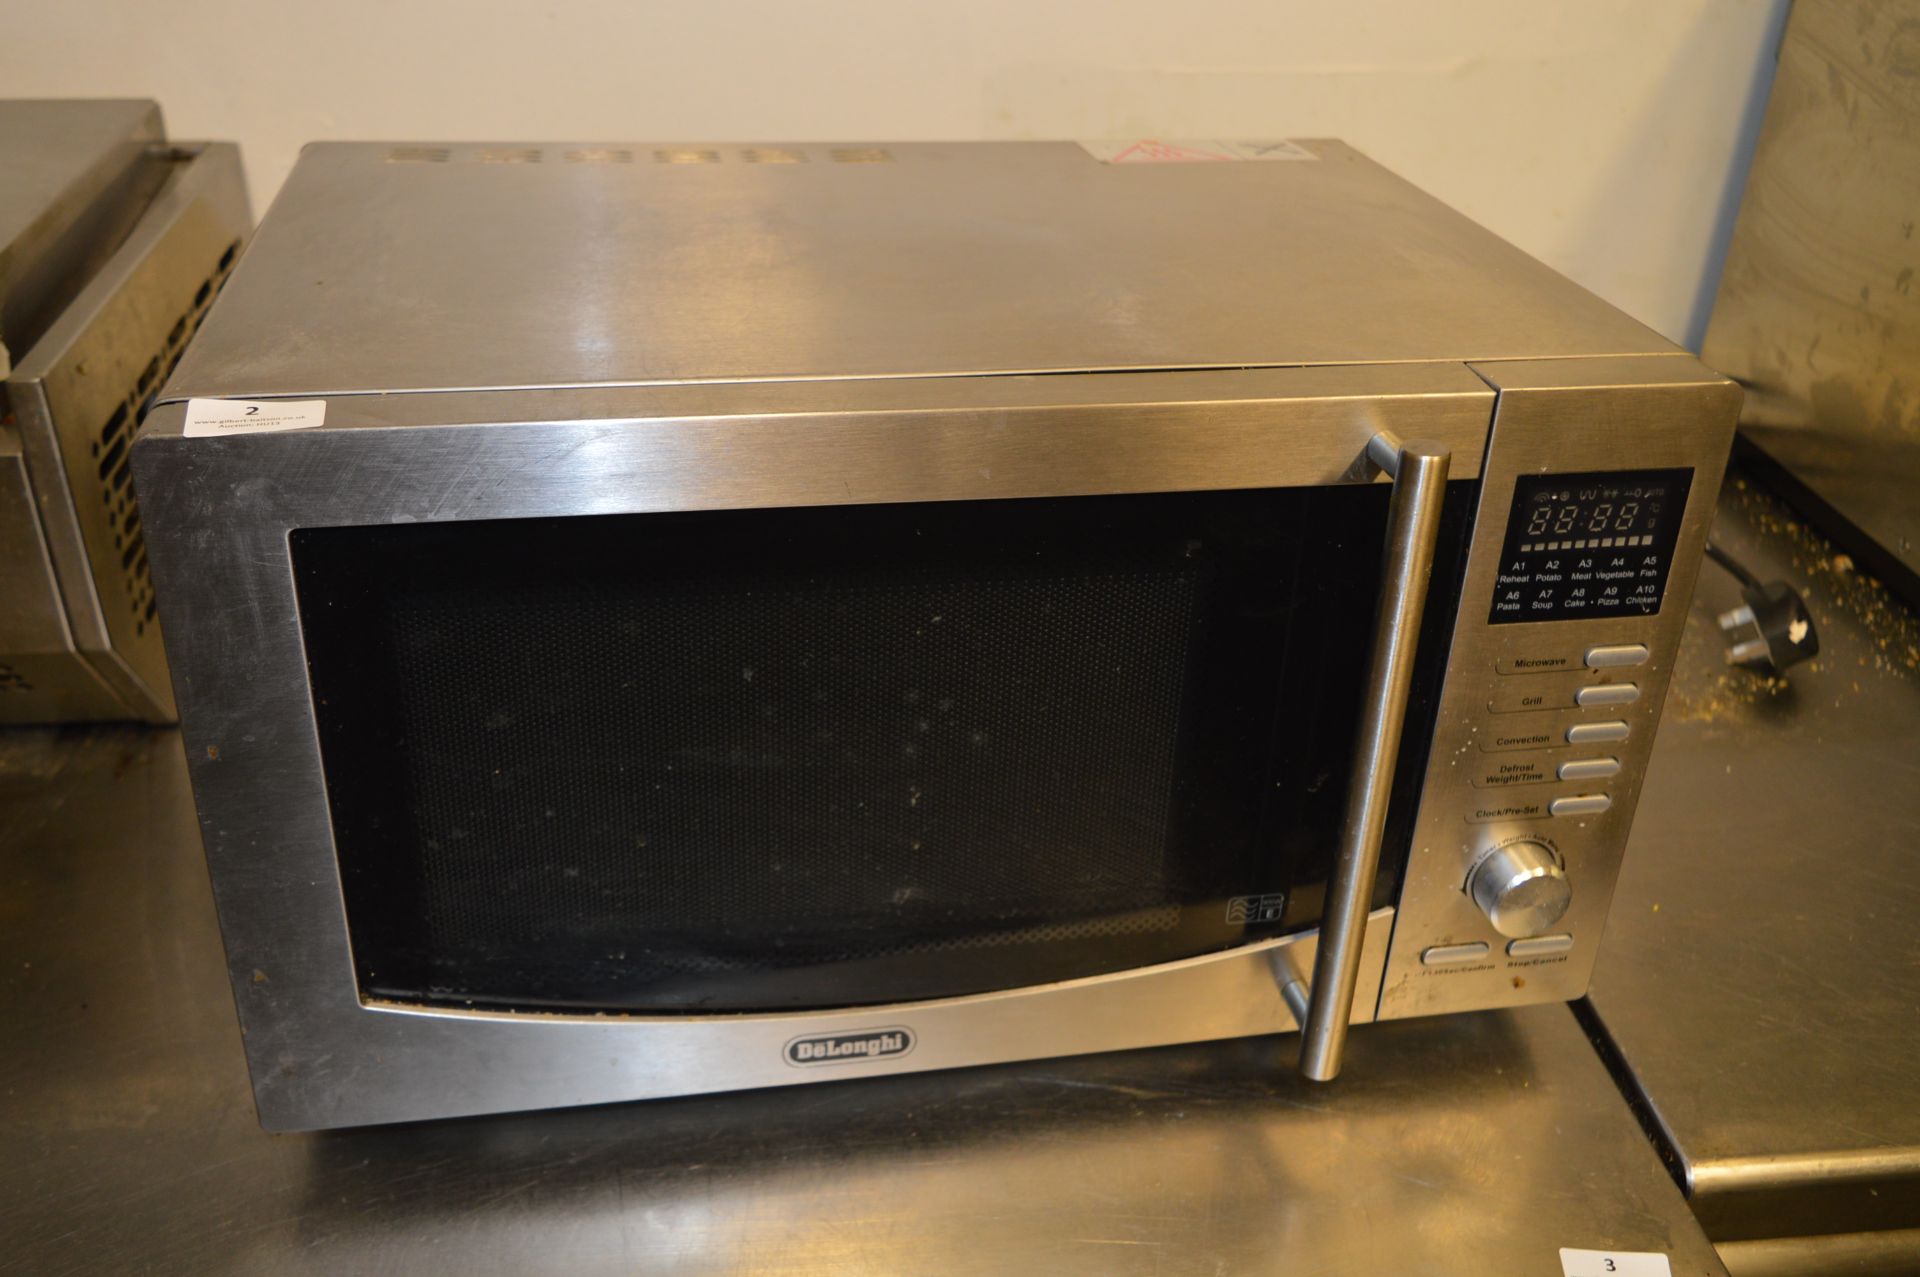 *Delonghi Stainless Steel 900W Microwave Oven